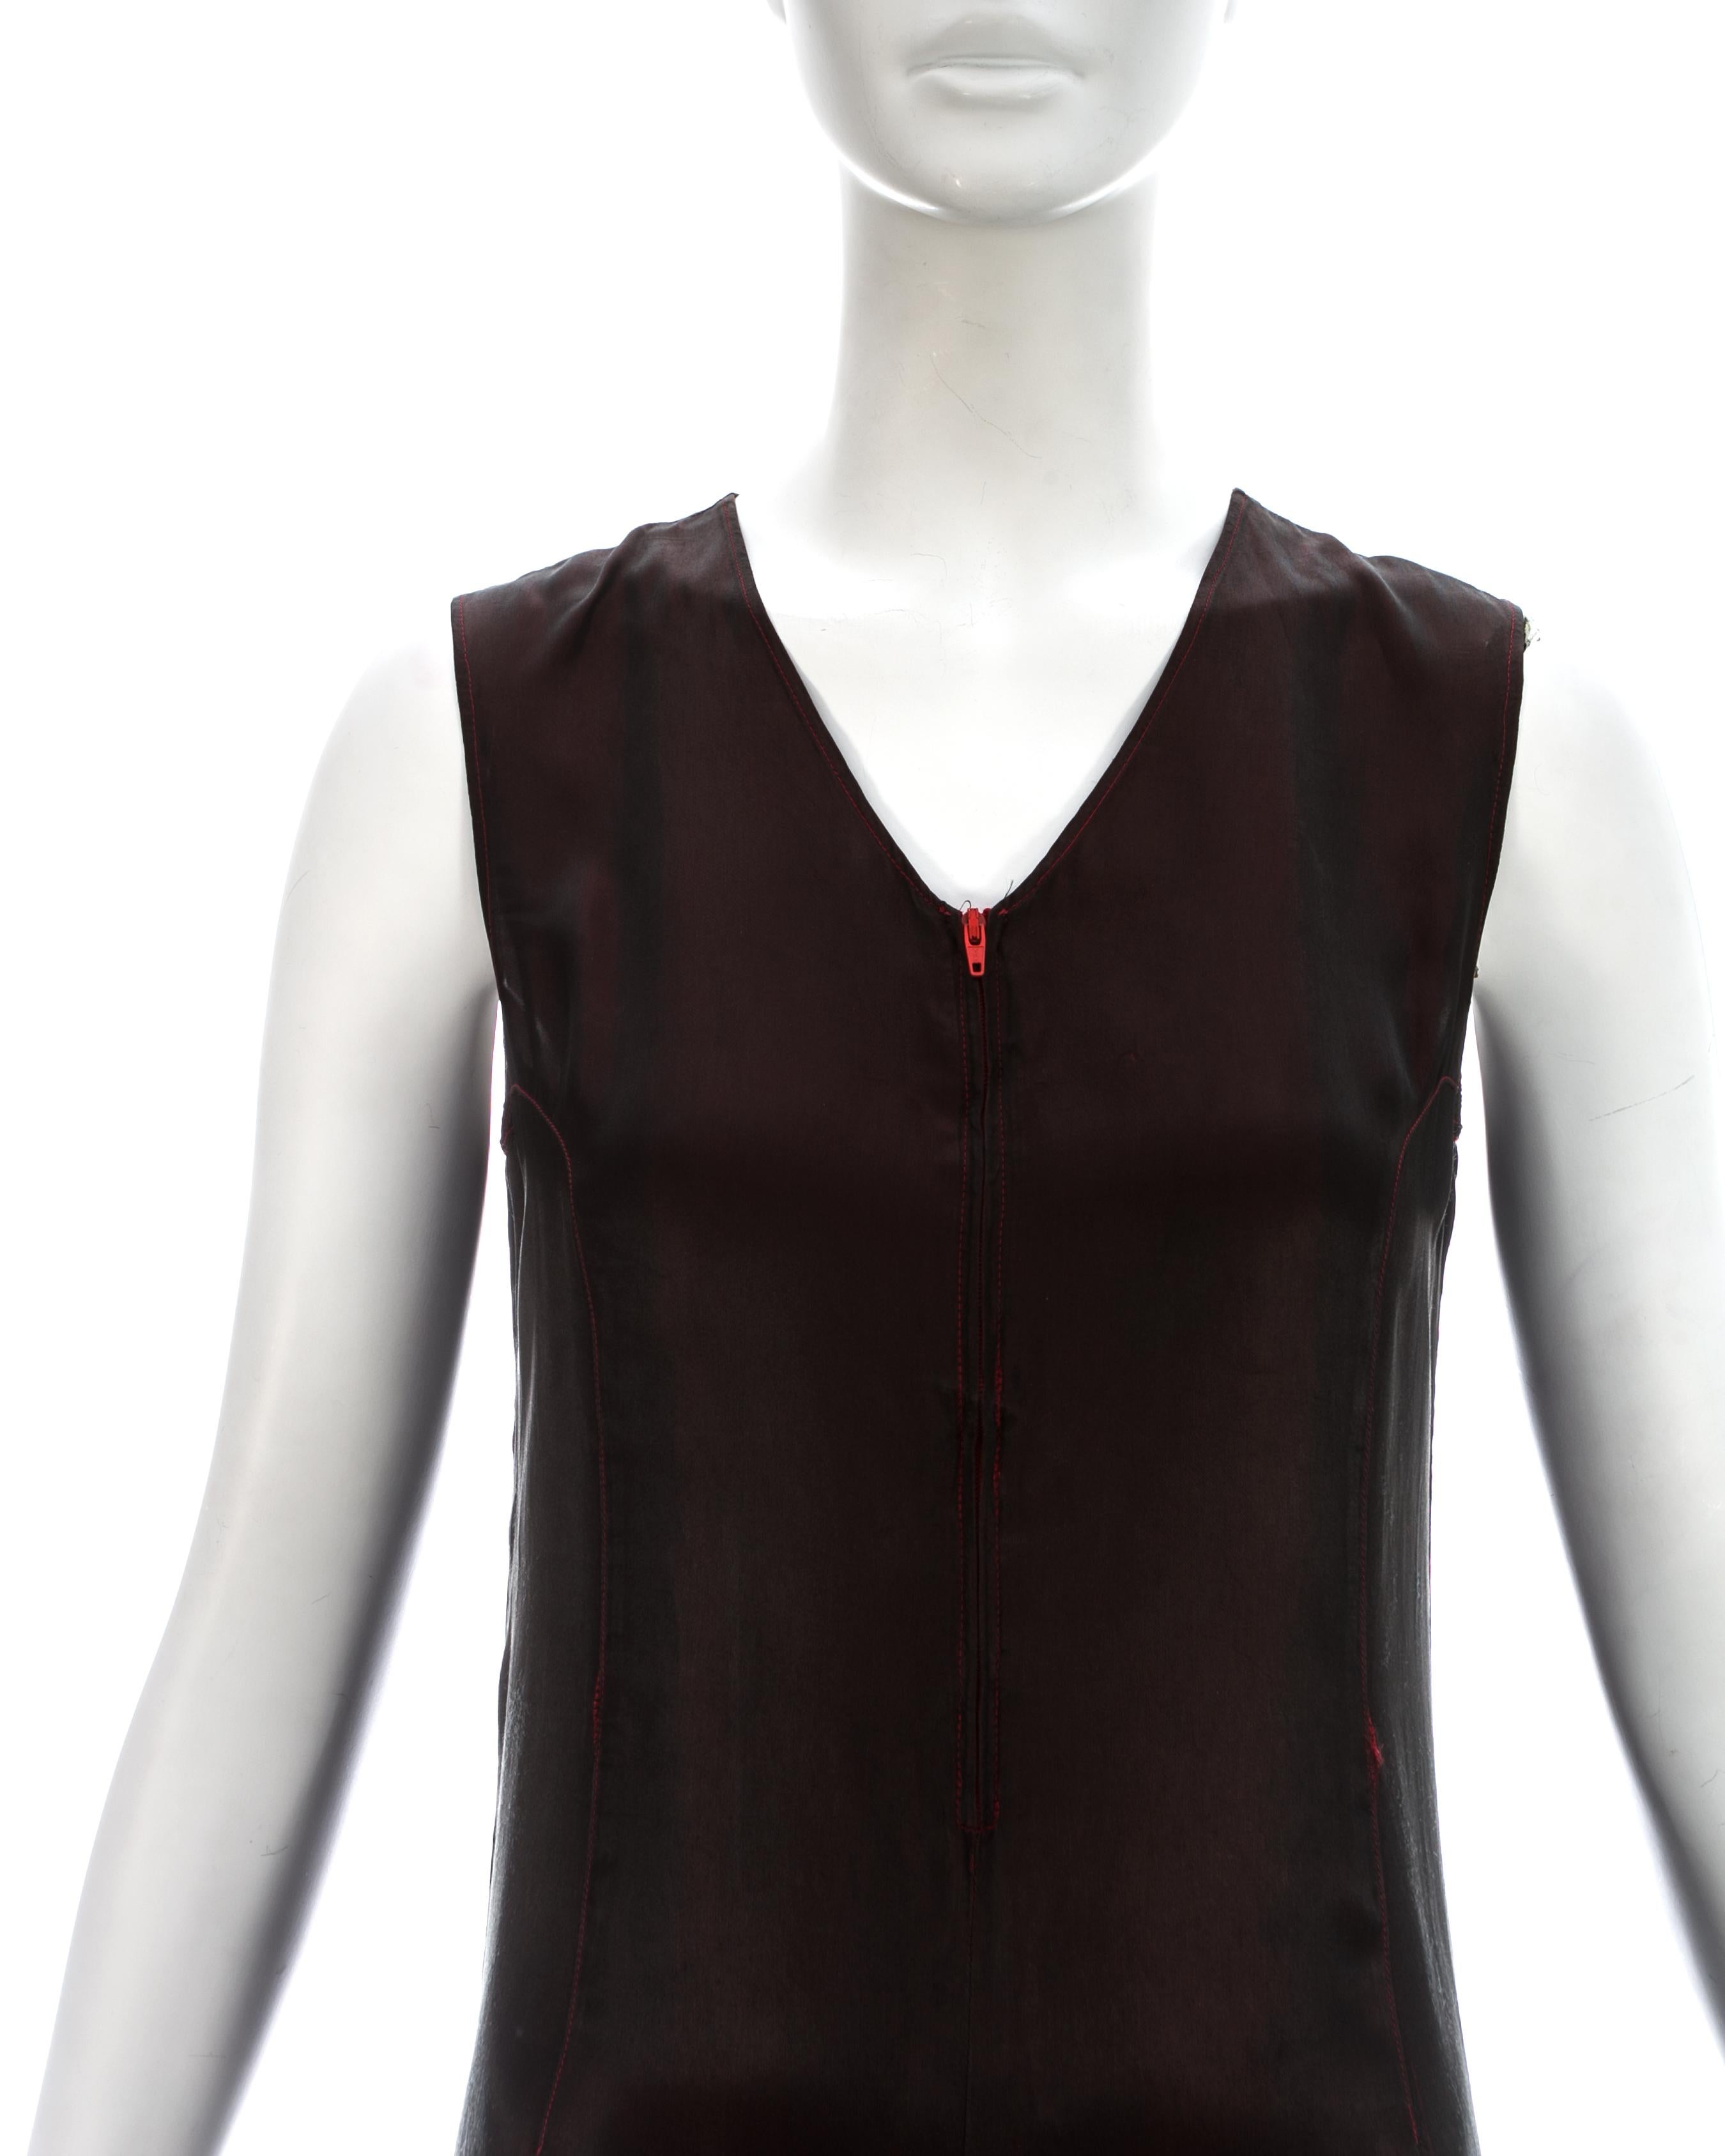 Martin Margiela red and black two-tone rayon slip dress, ca. 1997 In Fair Condition For Sale In London, London